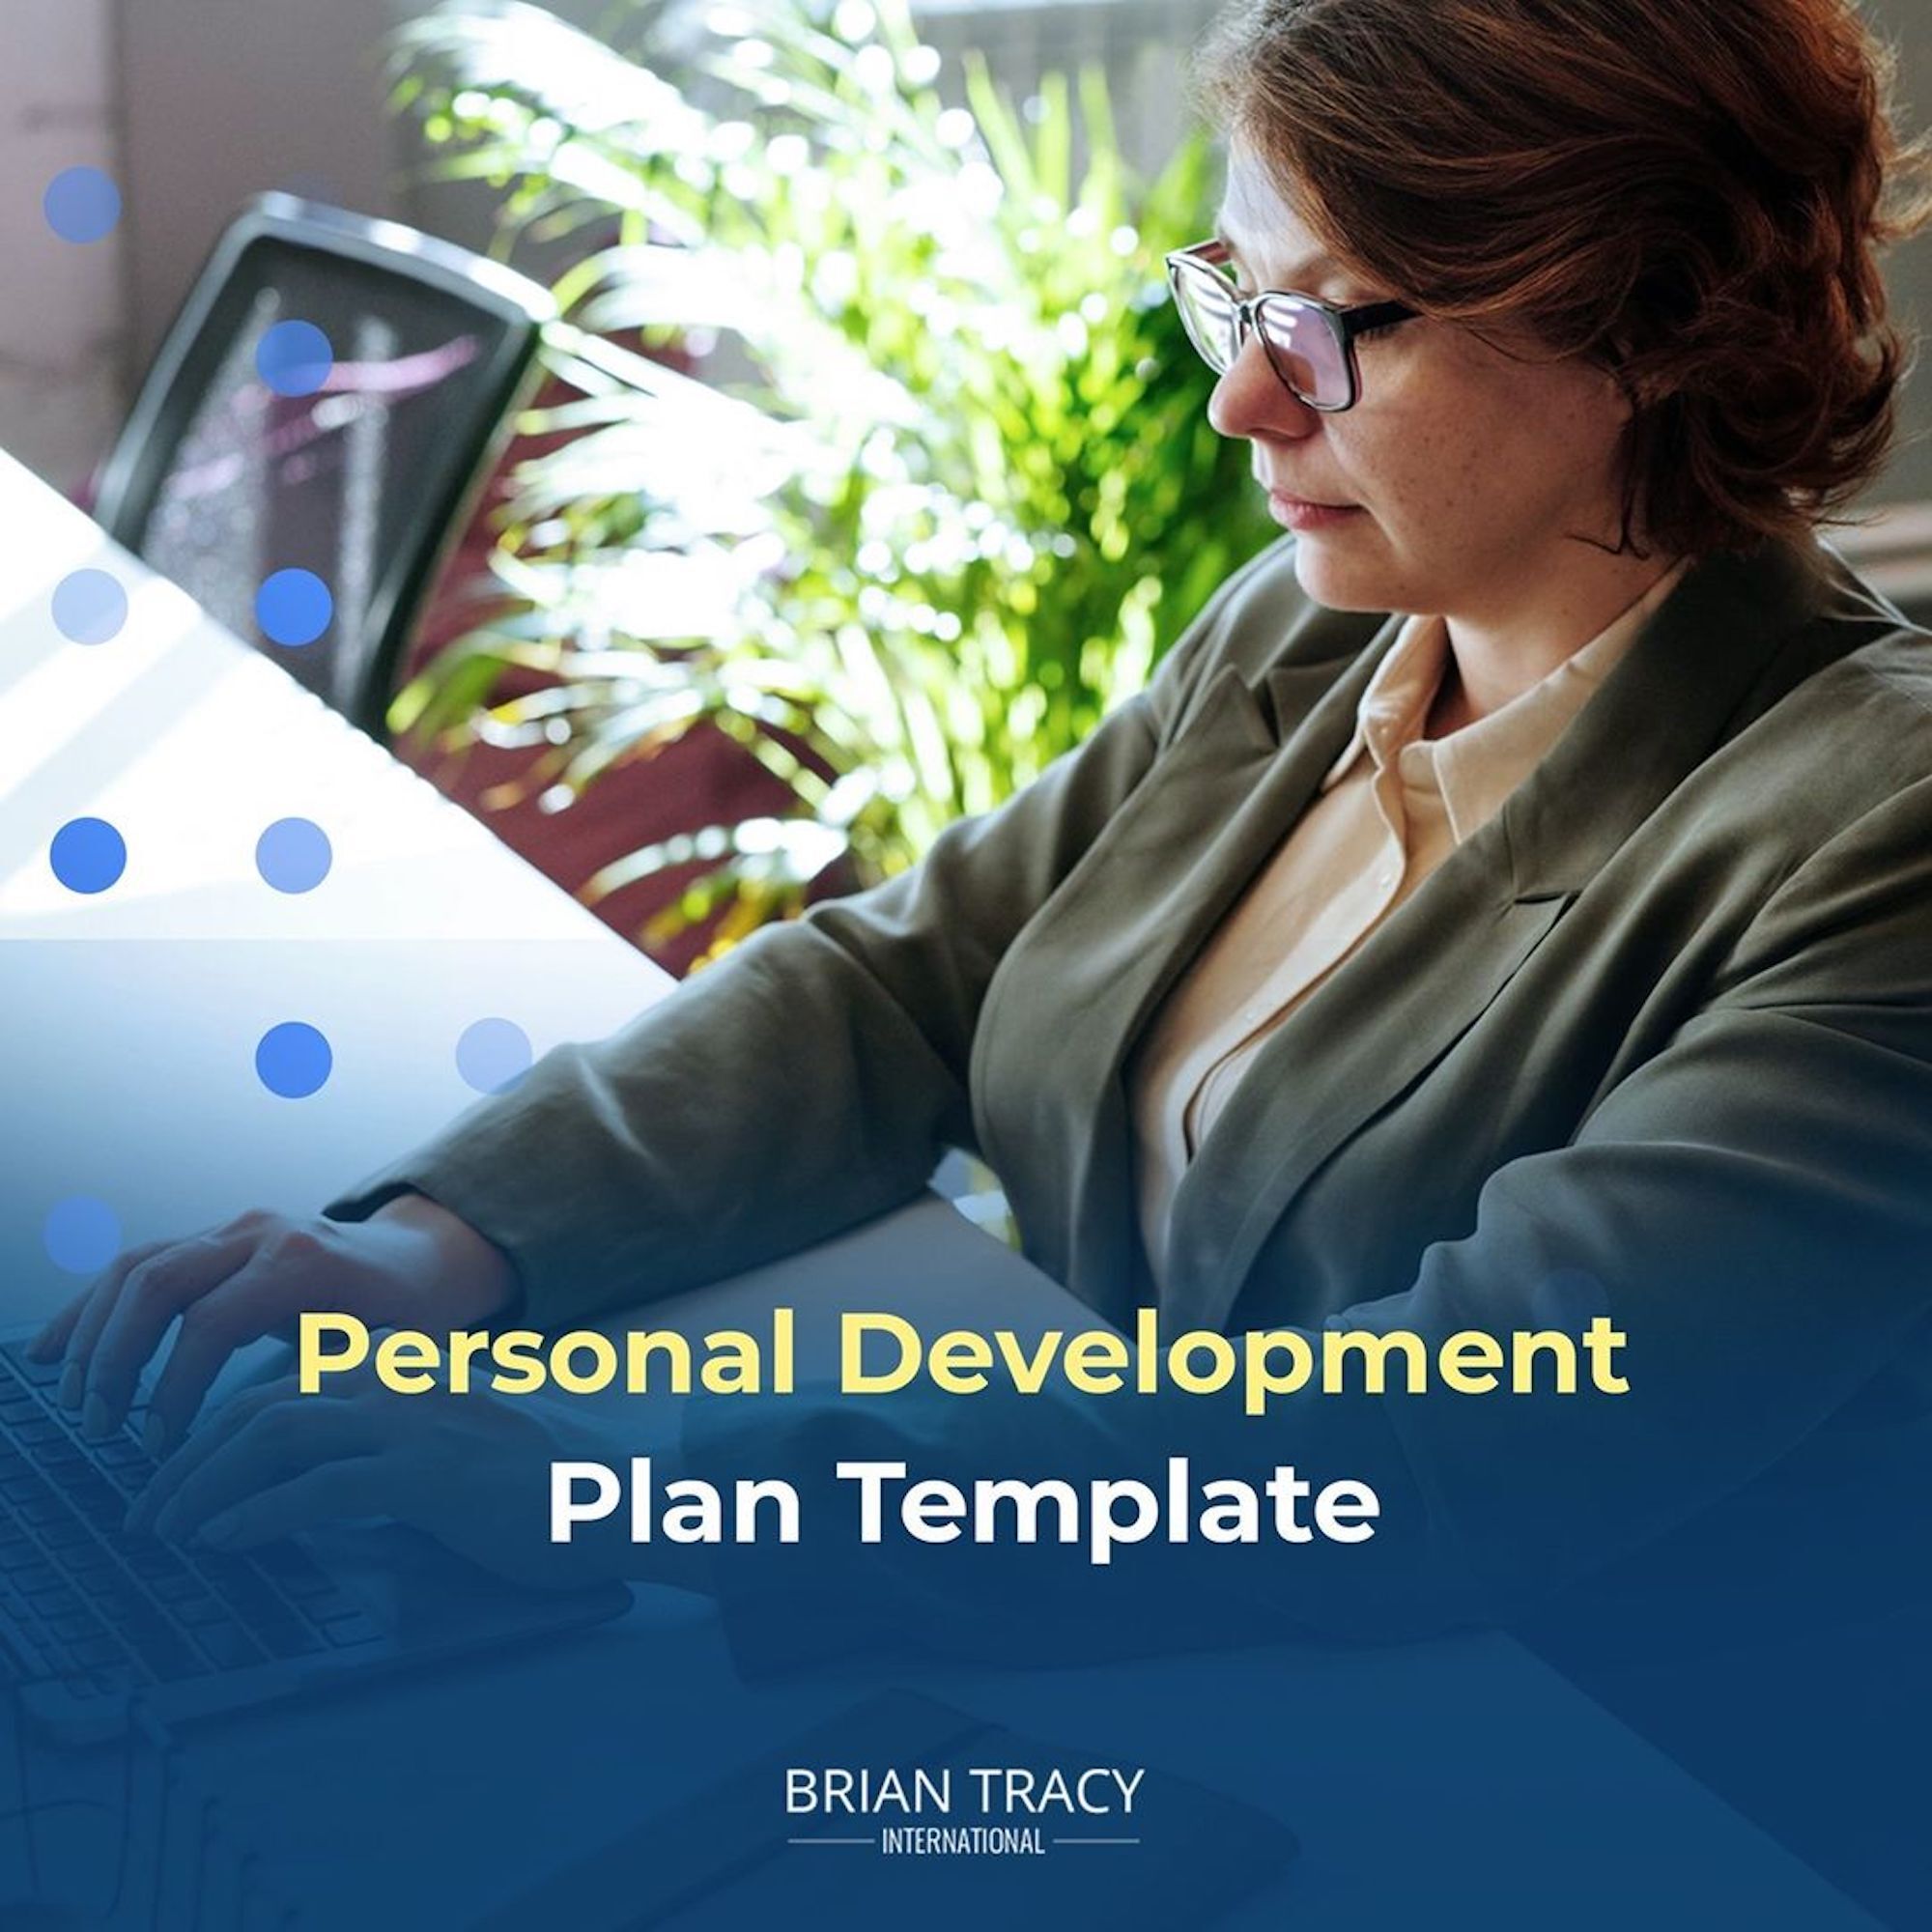 Personal Development Plan Examples for Success